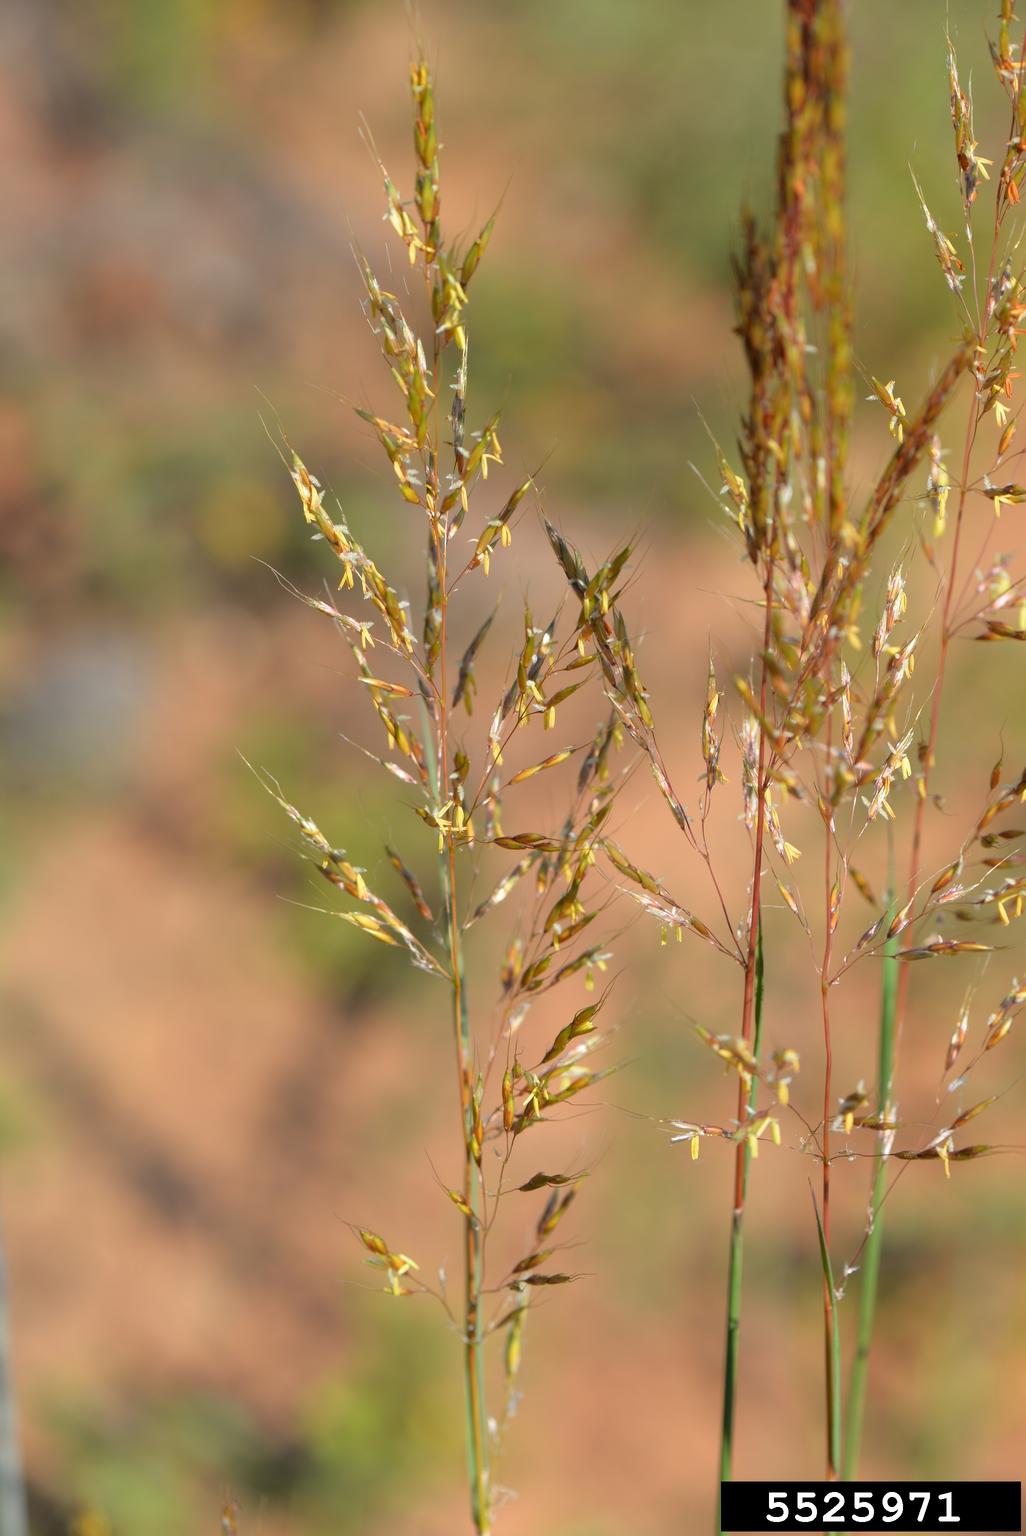 Photograph showing a close up-of yellow indiangrass inflorescences. Yellow stamens can be seen suspended from the inflorescences.